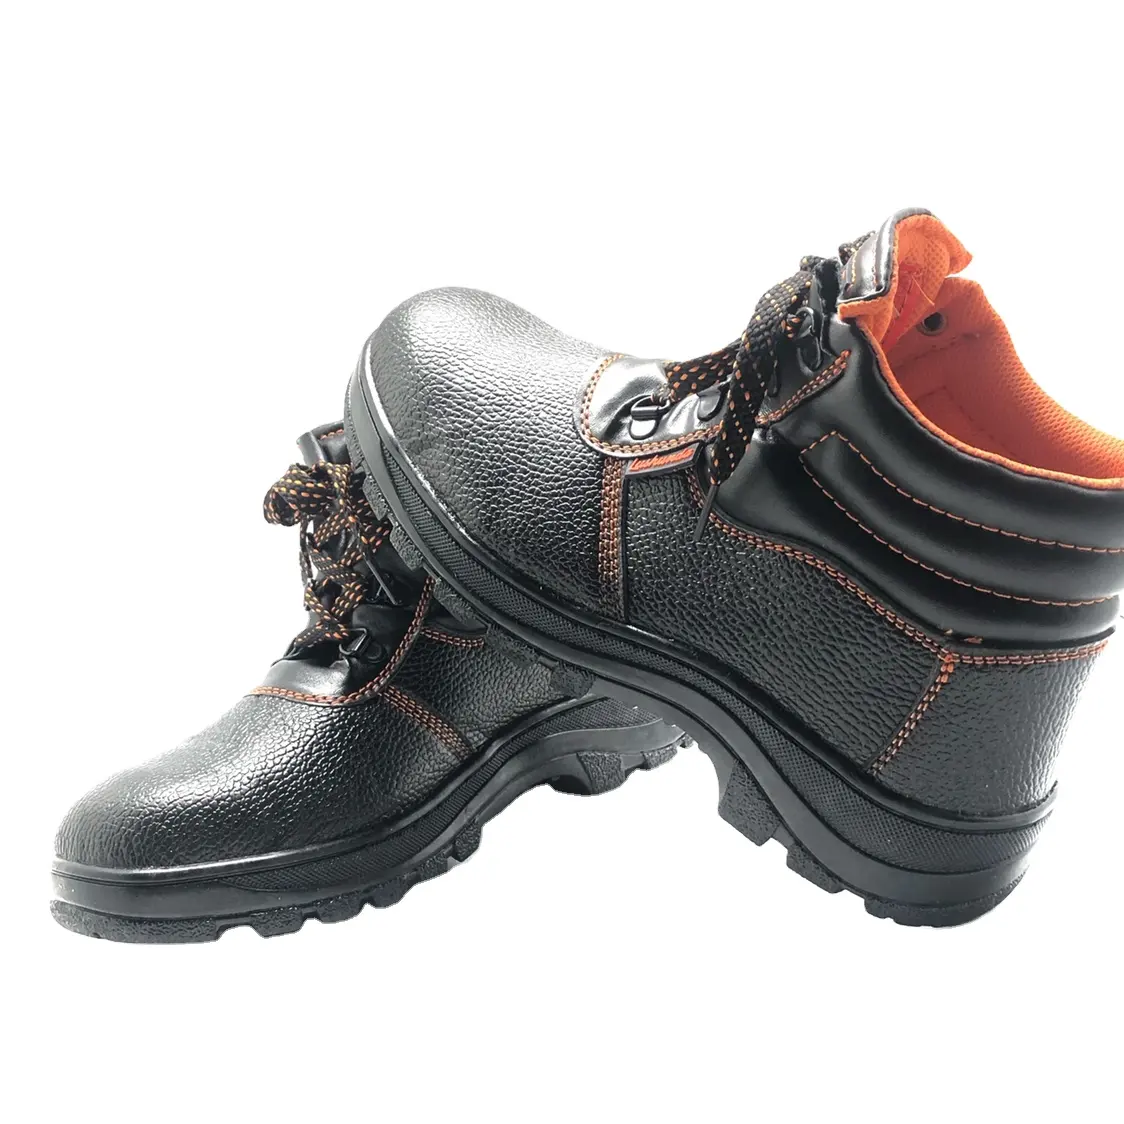 good quality Safety Boots Work Shoes Black Waterproof Work Boots Steel Toe Safety Shoes